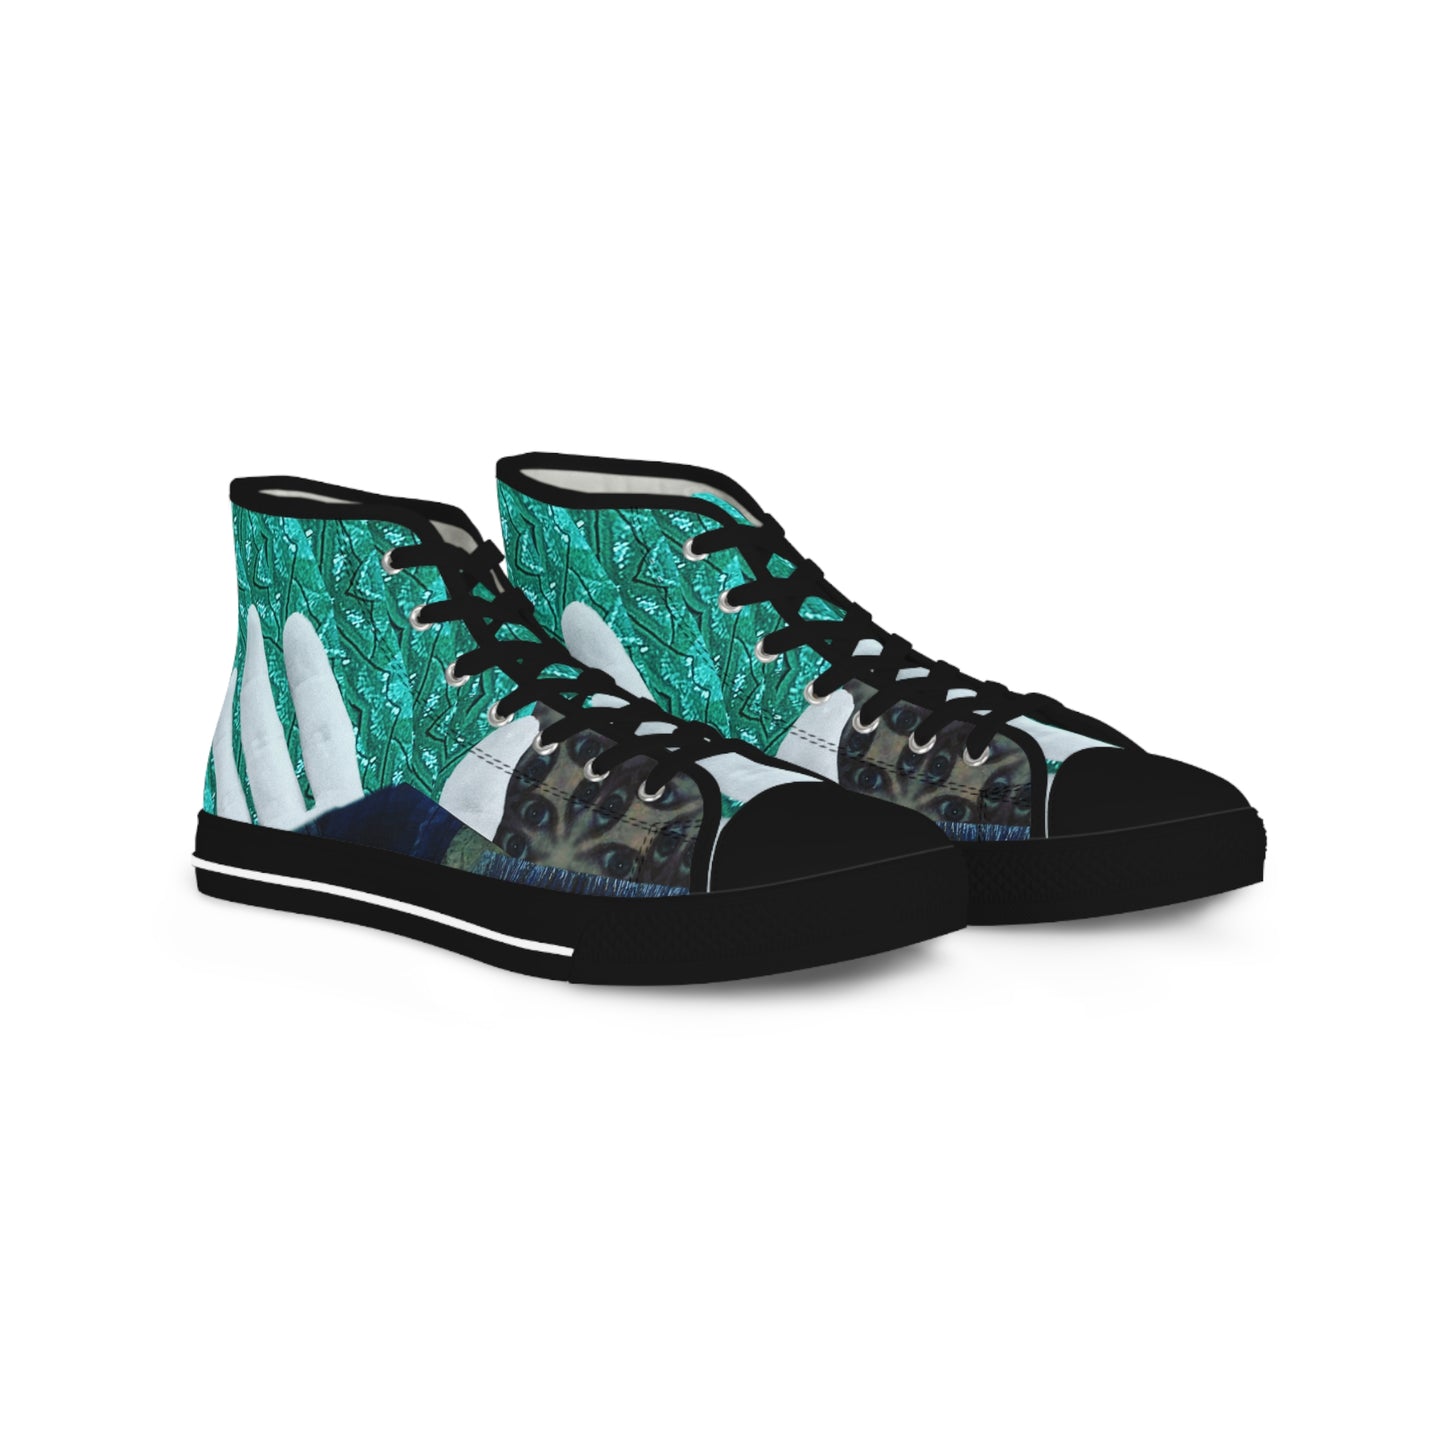 Limited Edition High Top Sneakers - Apostle